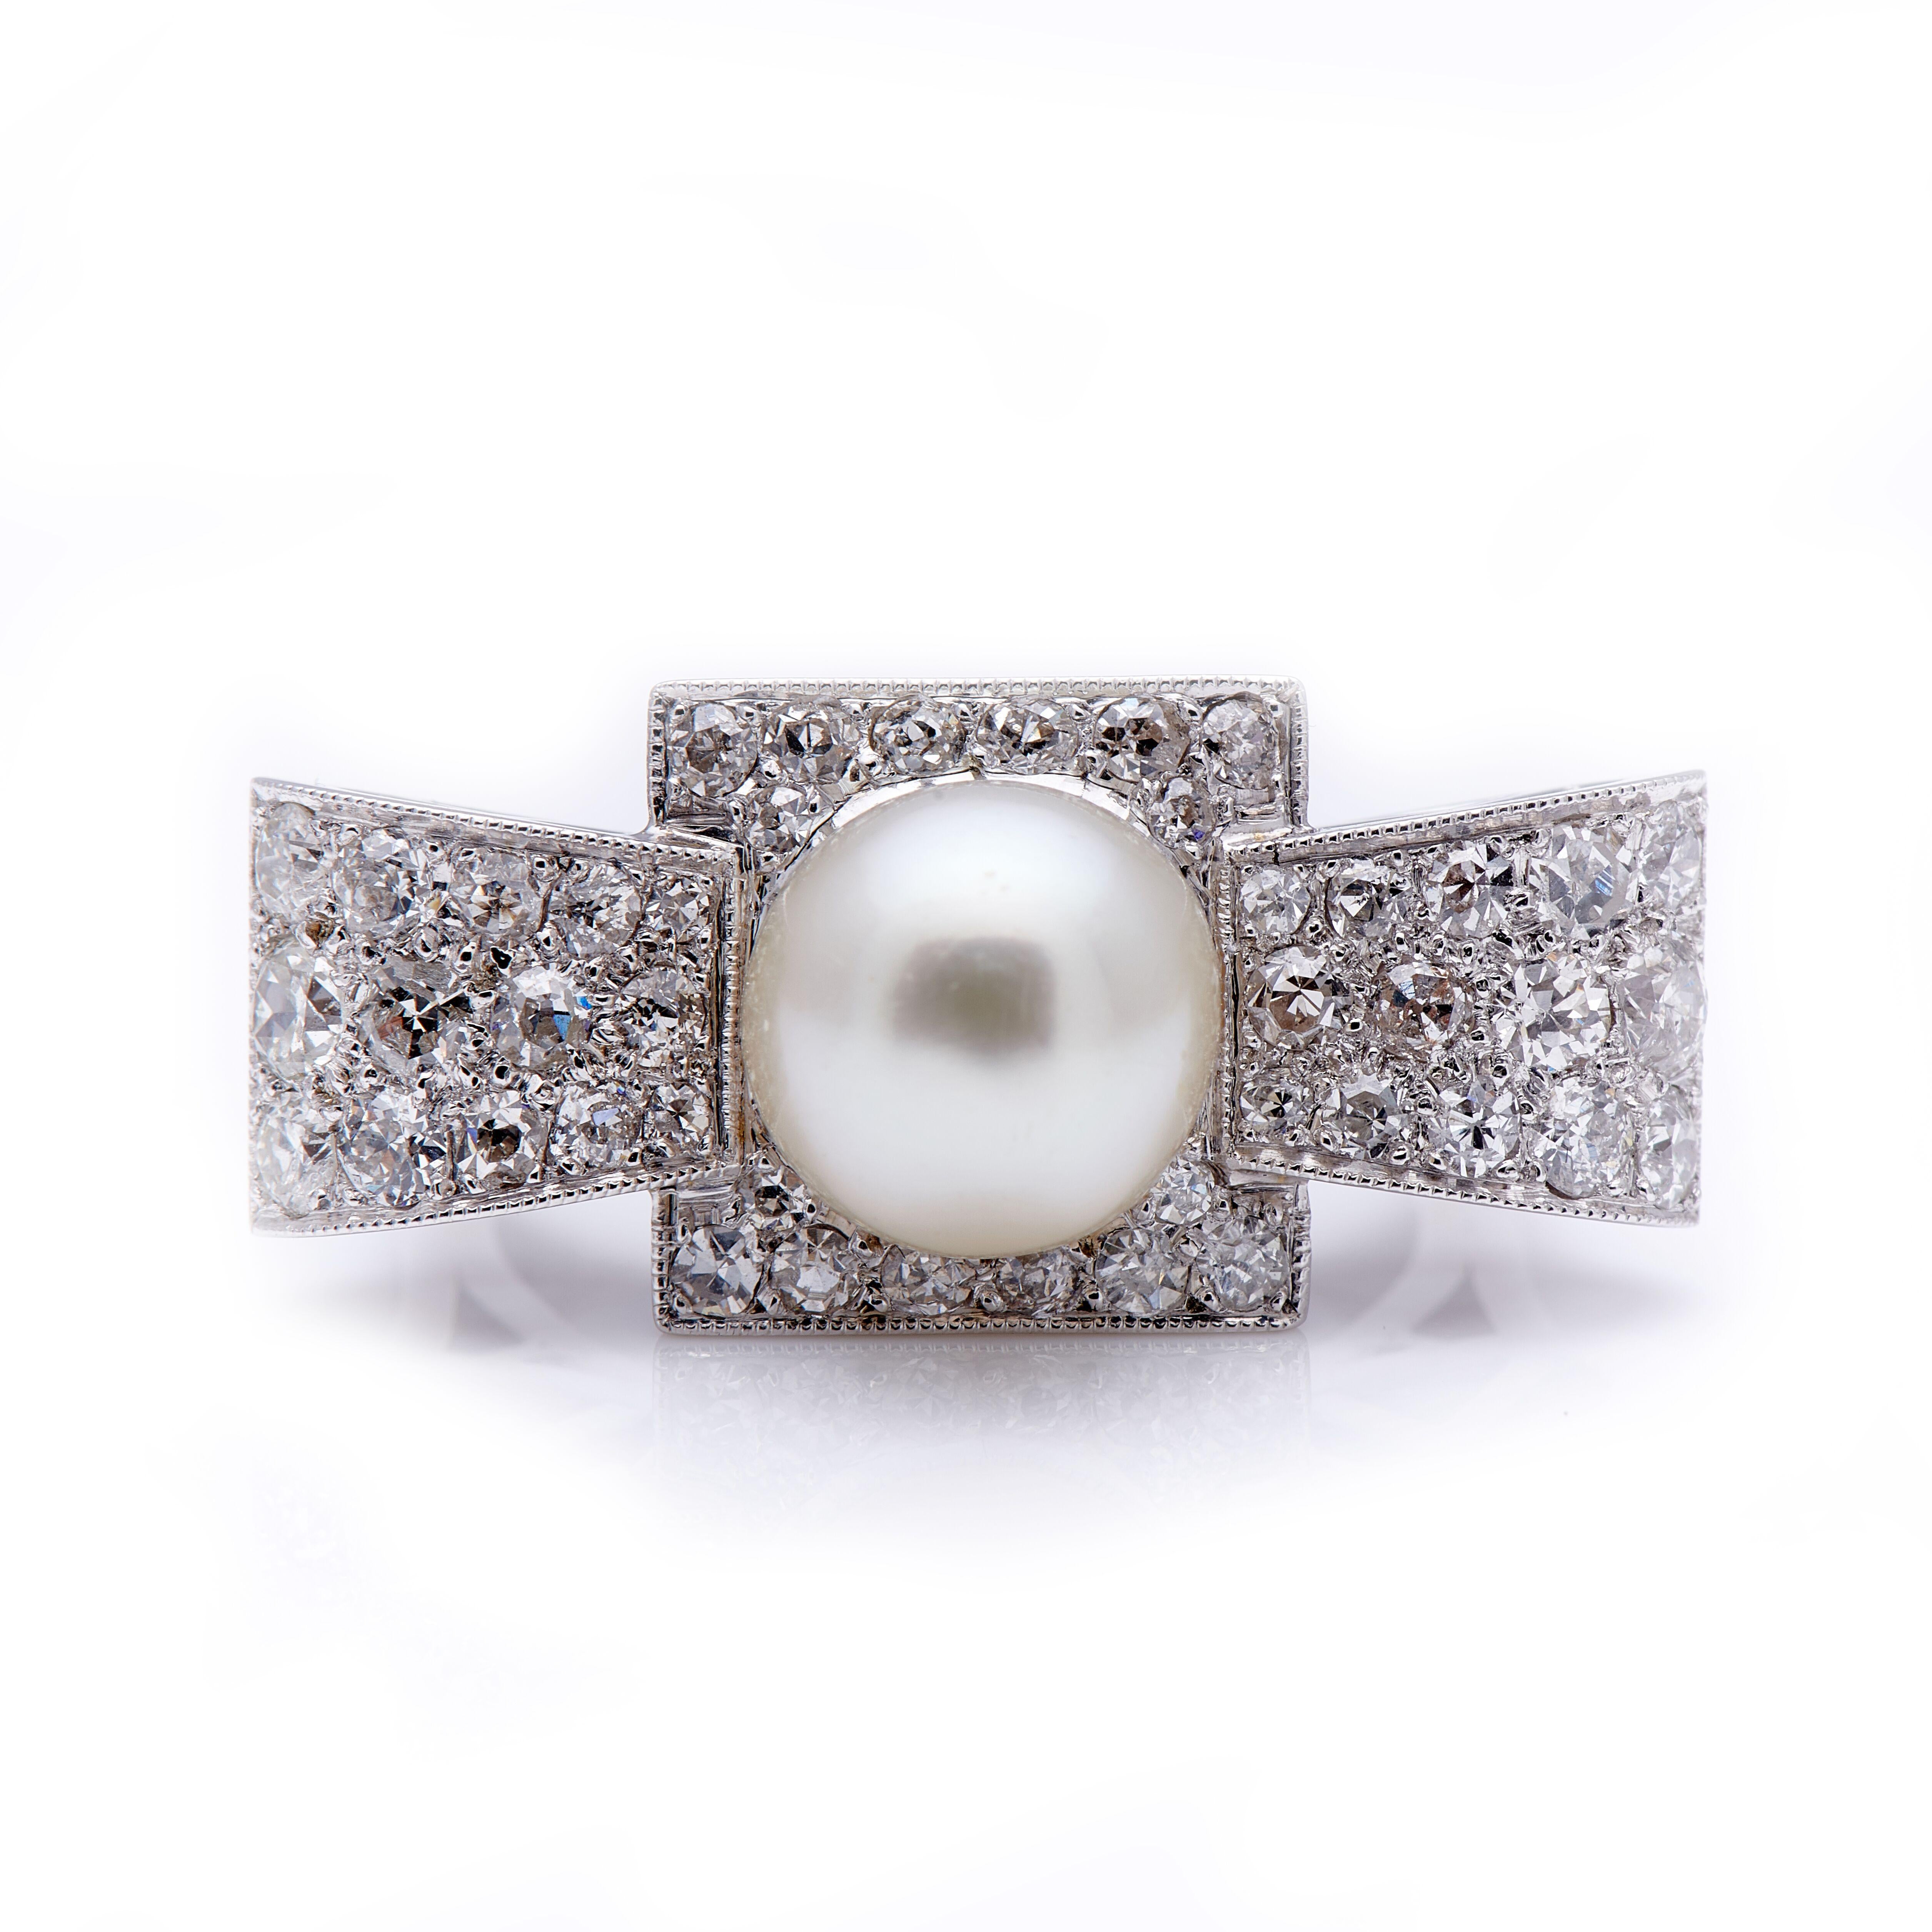 Art Deco, pearl and diamond cocktail ring, circa 1930. A hugely impressive ring, set with a single lustrous white pearl in the centre of a wonderful diamond set bow-like design. This ring is not for the faint-hearted, its size equals its beauty. The